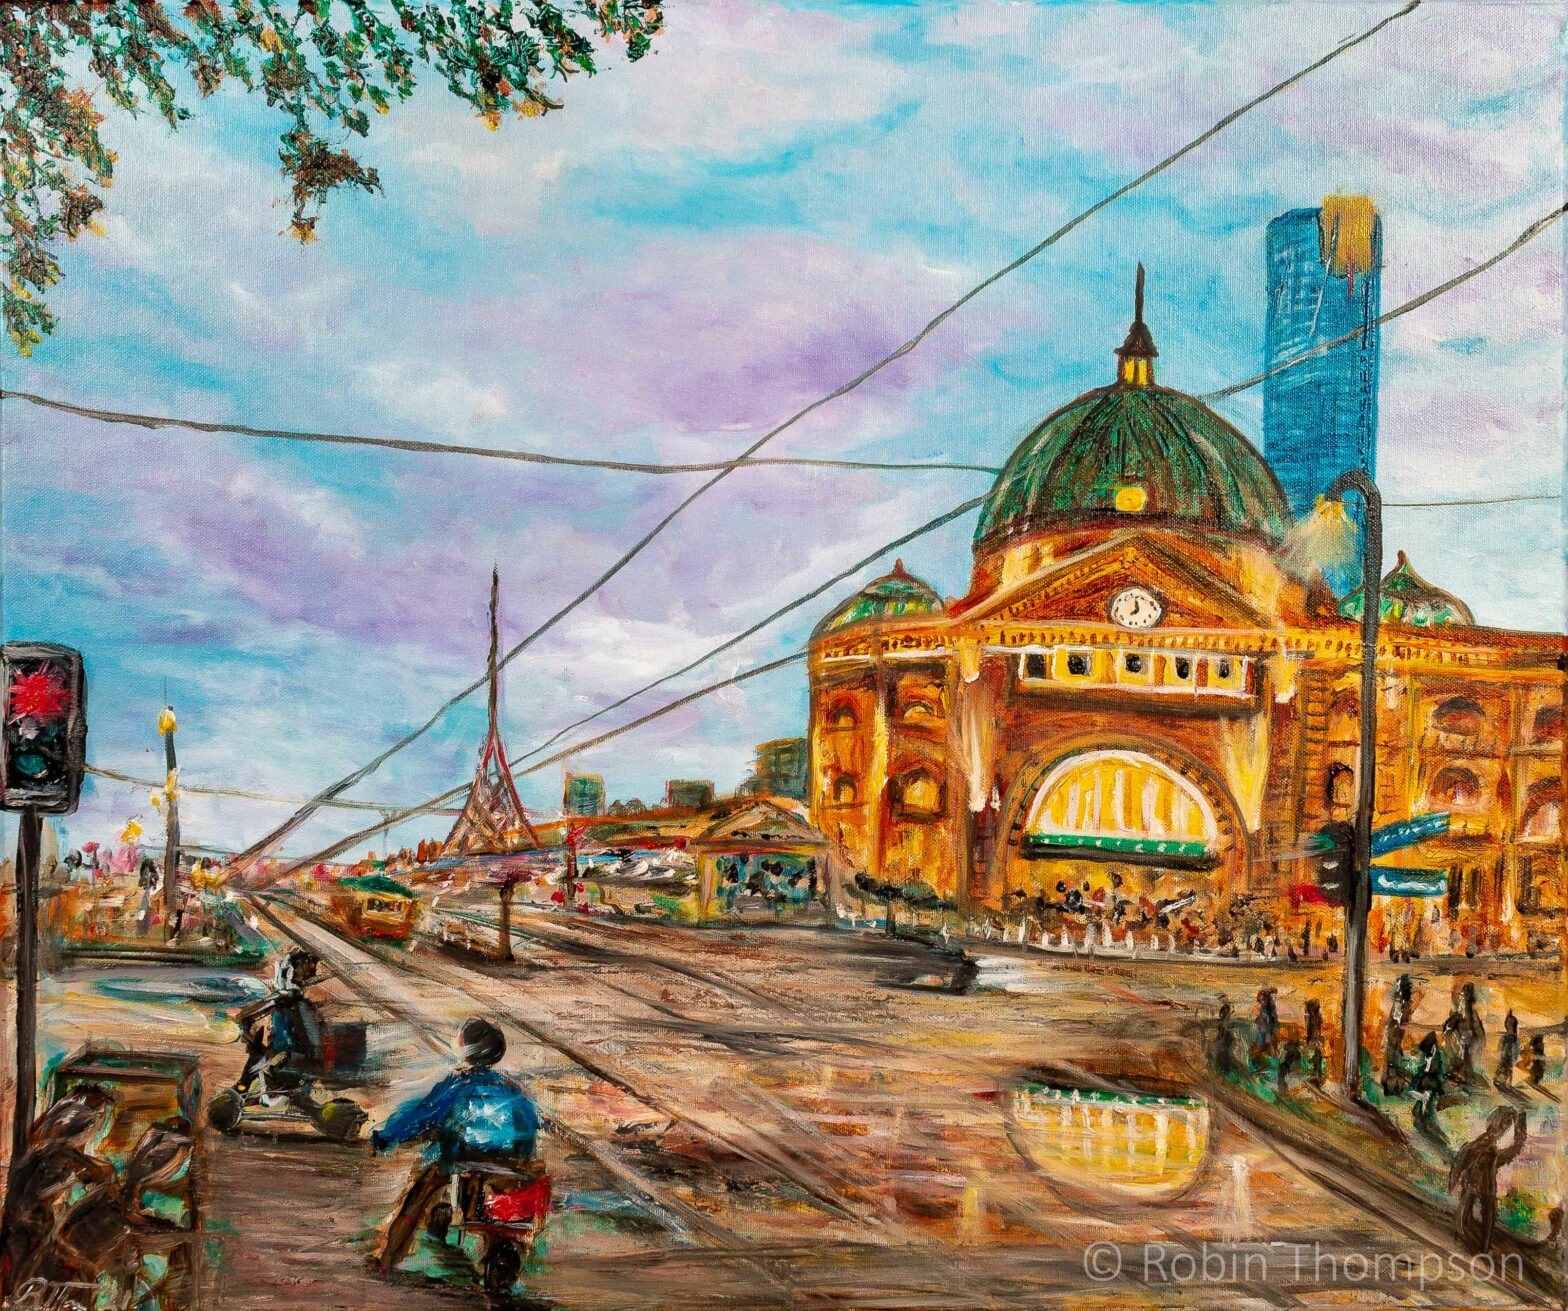 Oil painting showing a train station lit up in yellow and gold, with a blue and purple sky, and many people/drivers/motorcyclists in the foreground going about their business.